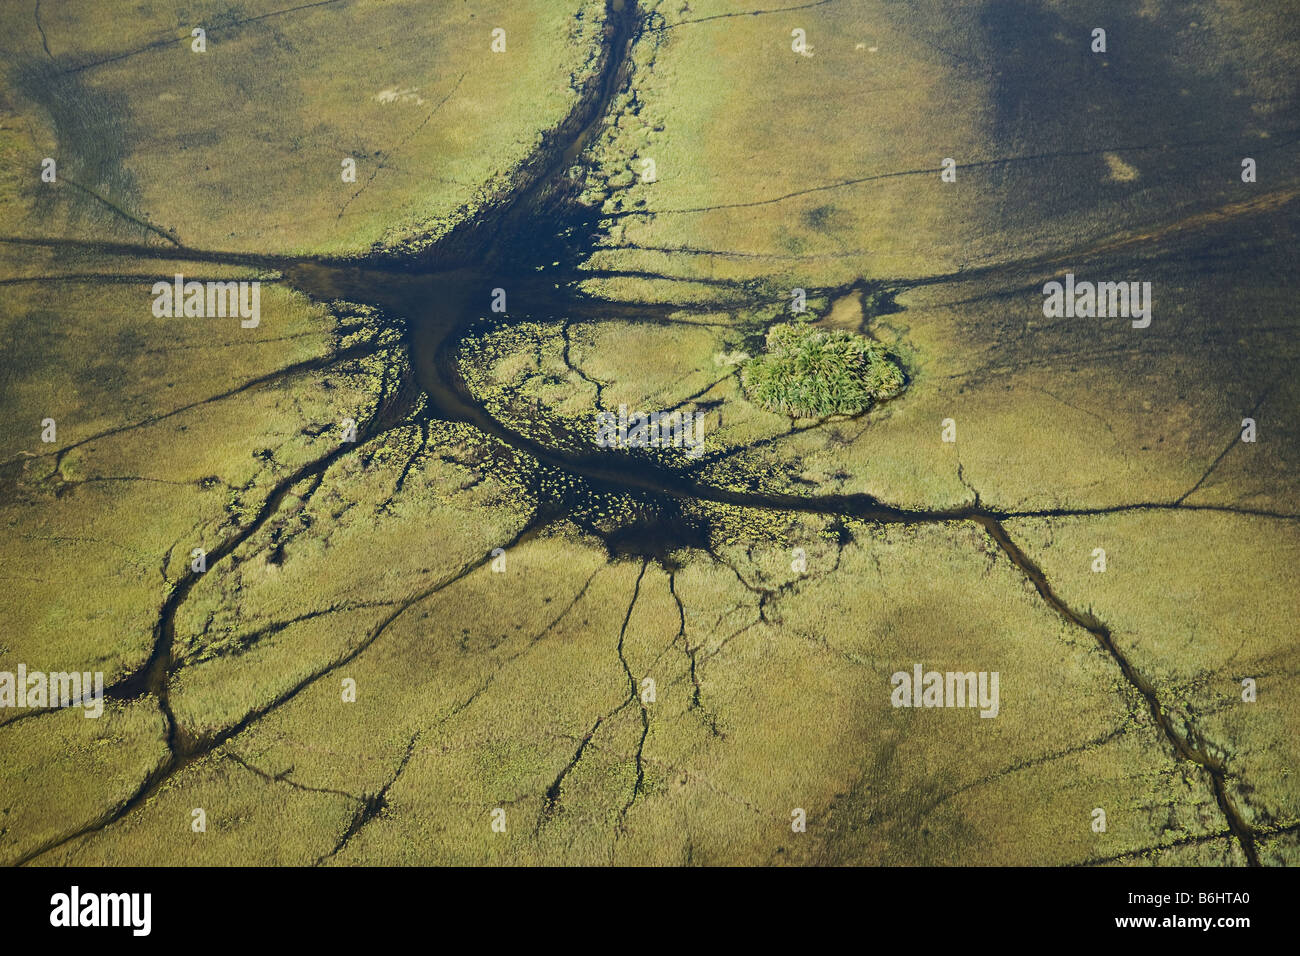 Aerial view of animal pathways and island in the Okavango Delta Paths mainly created by hippopotamus and elephants Stock Photo